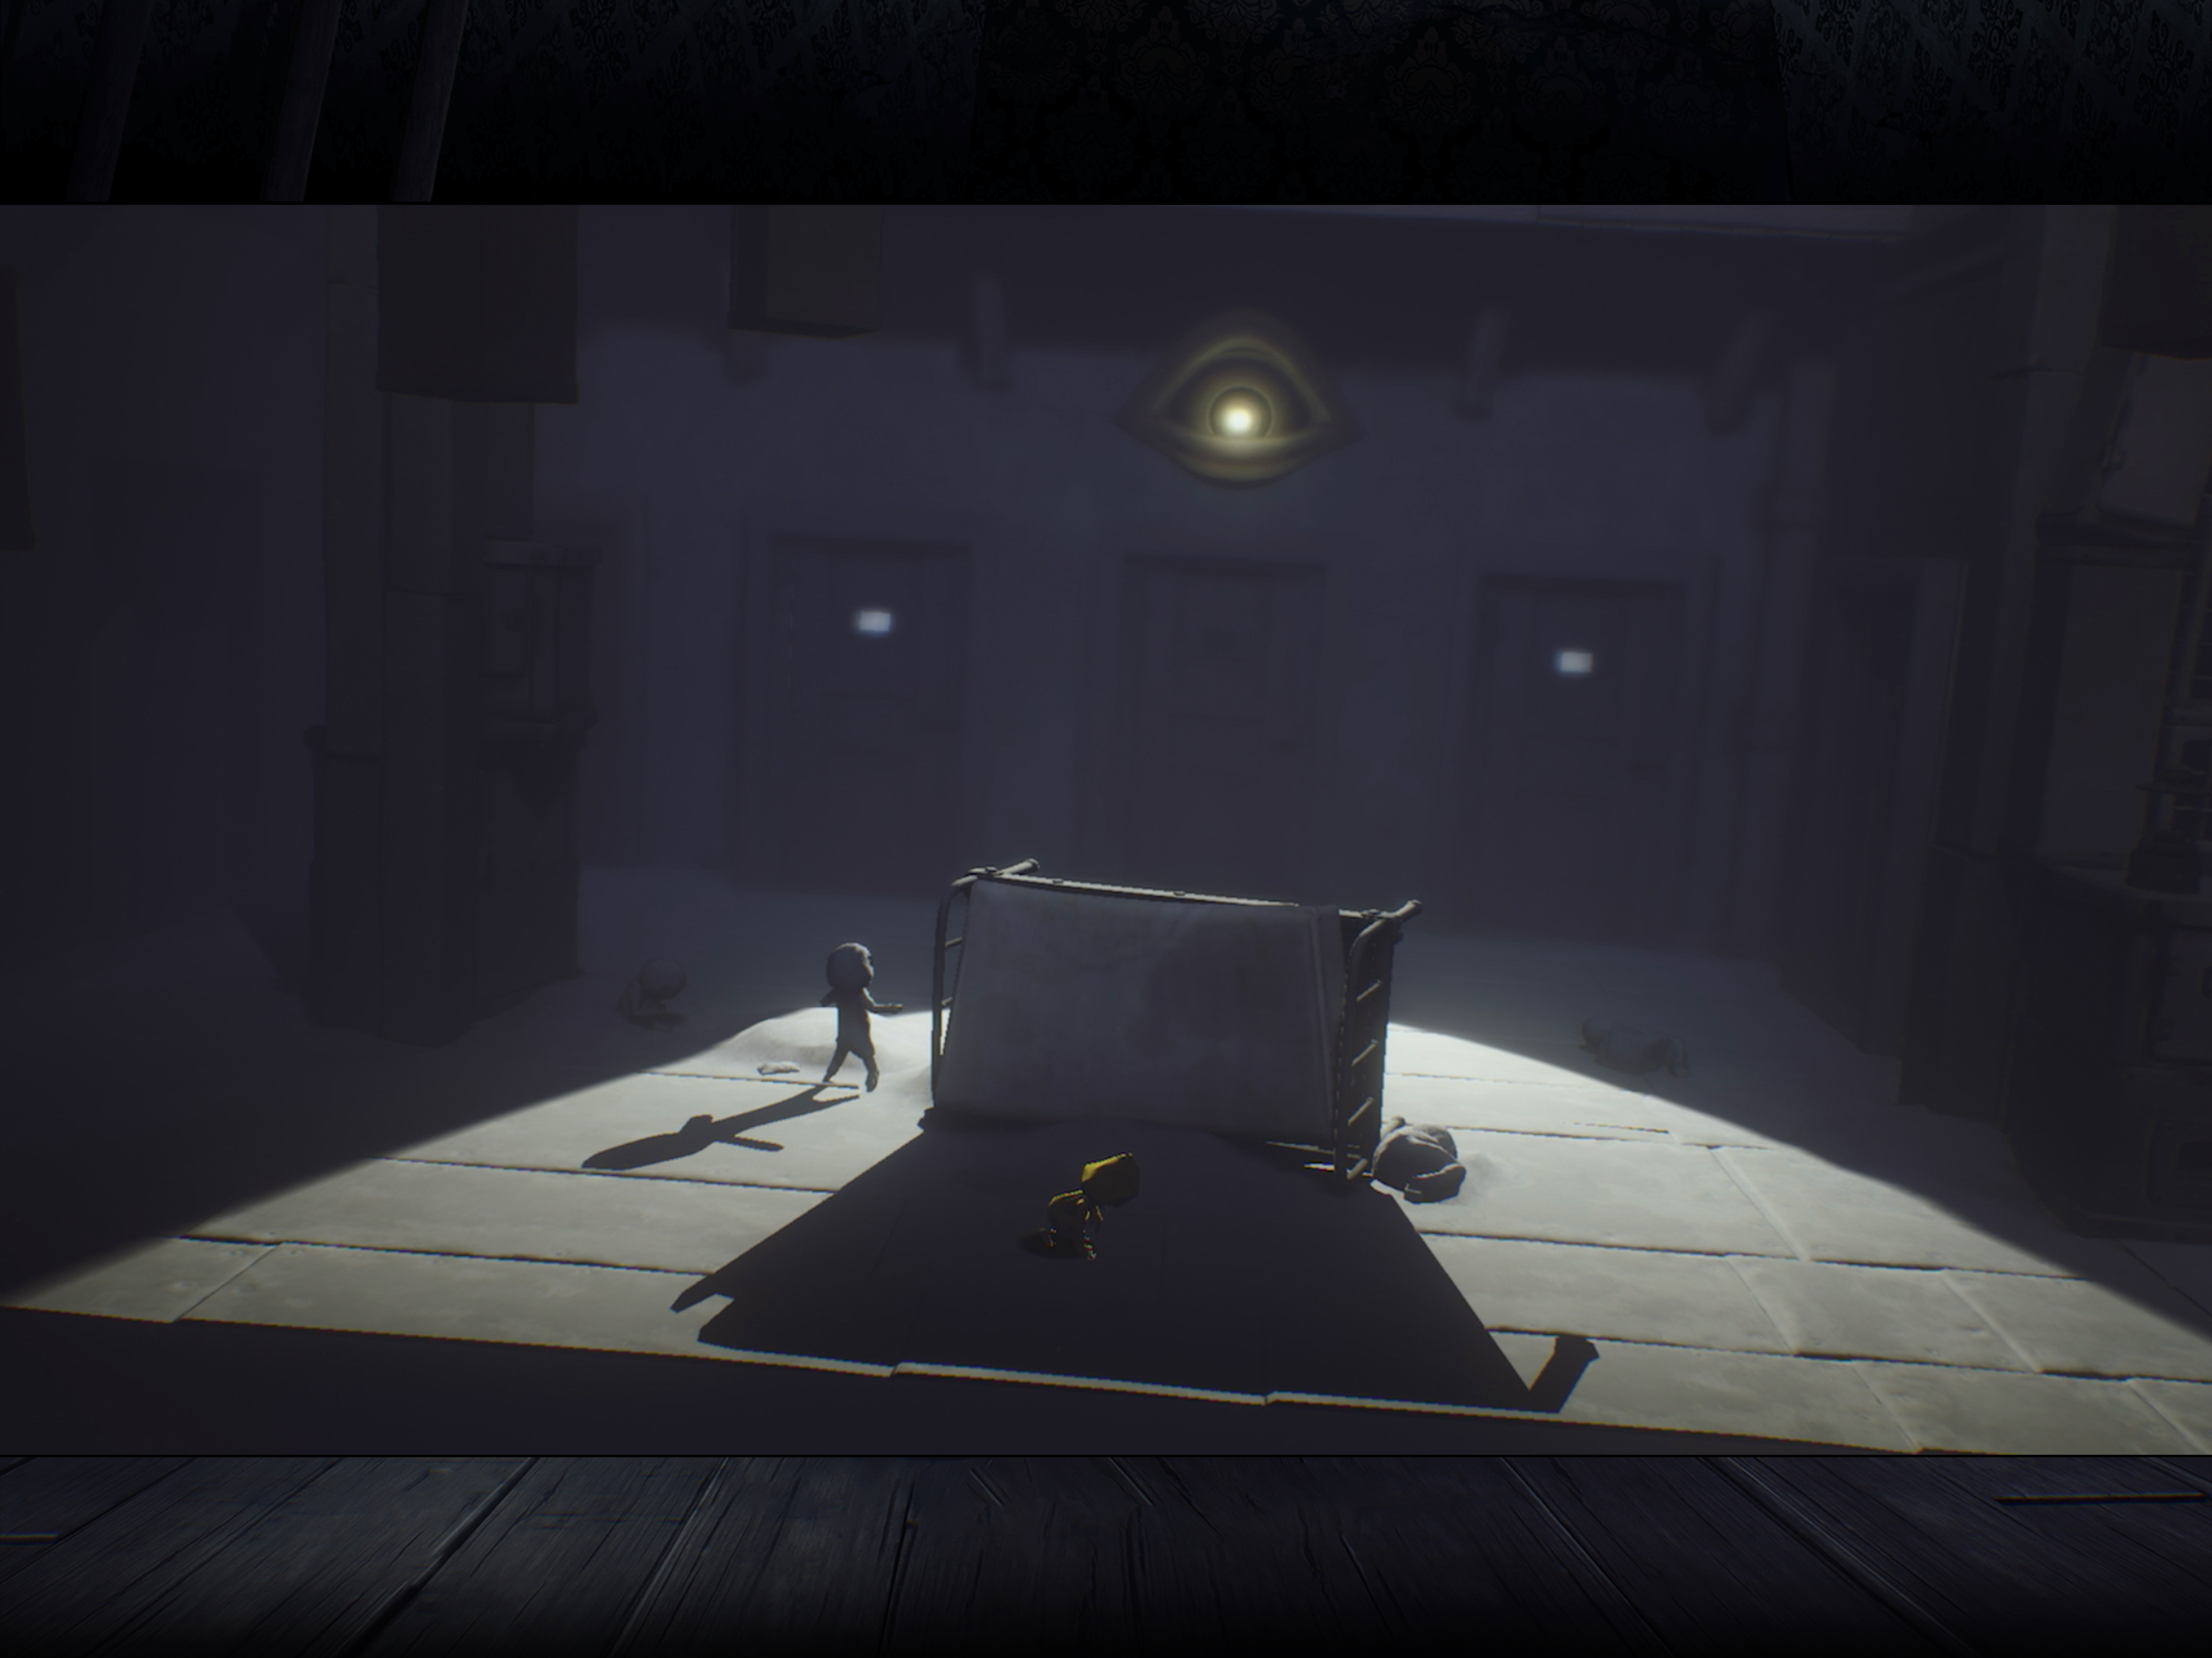 Little Nightmares II APK for Android Download